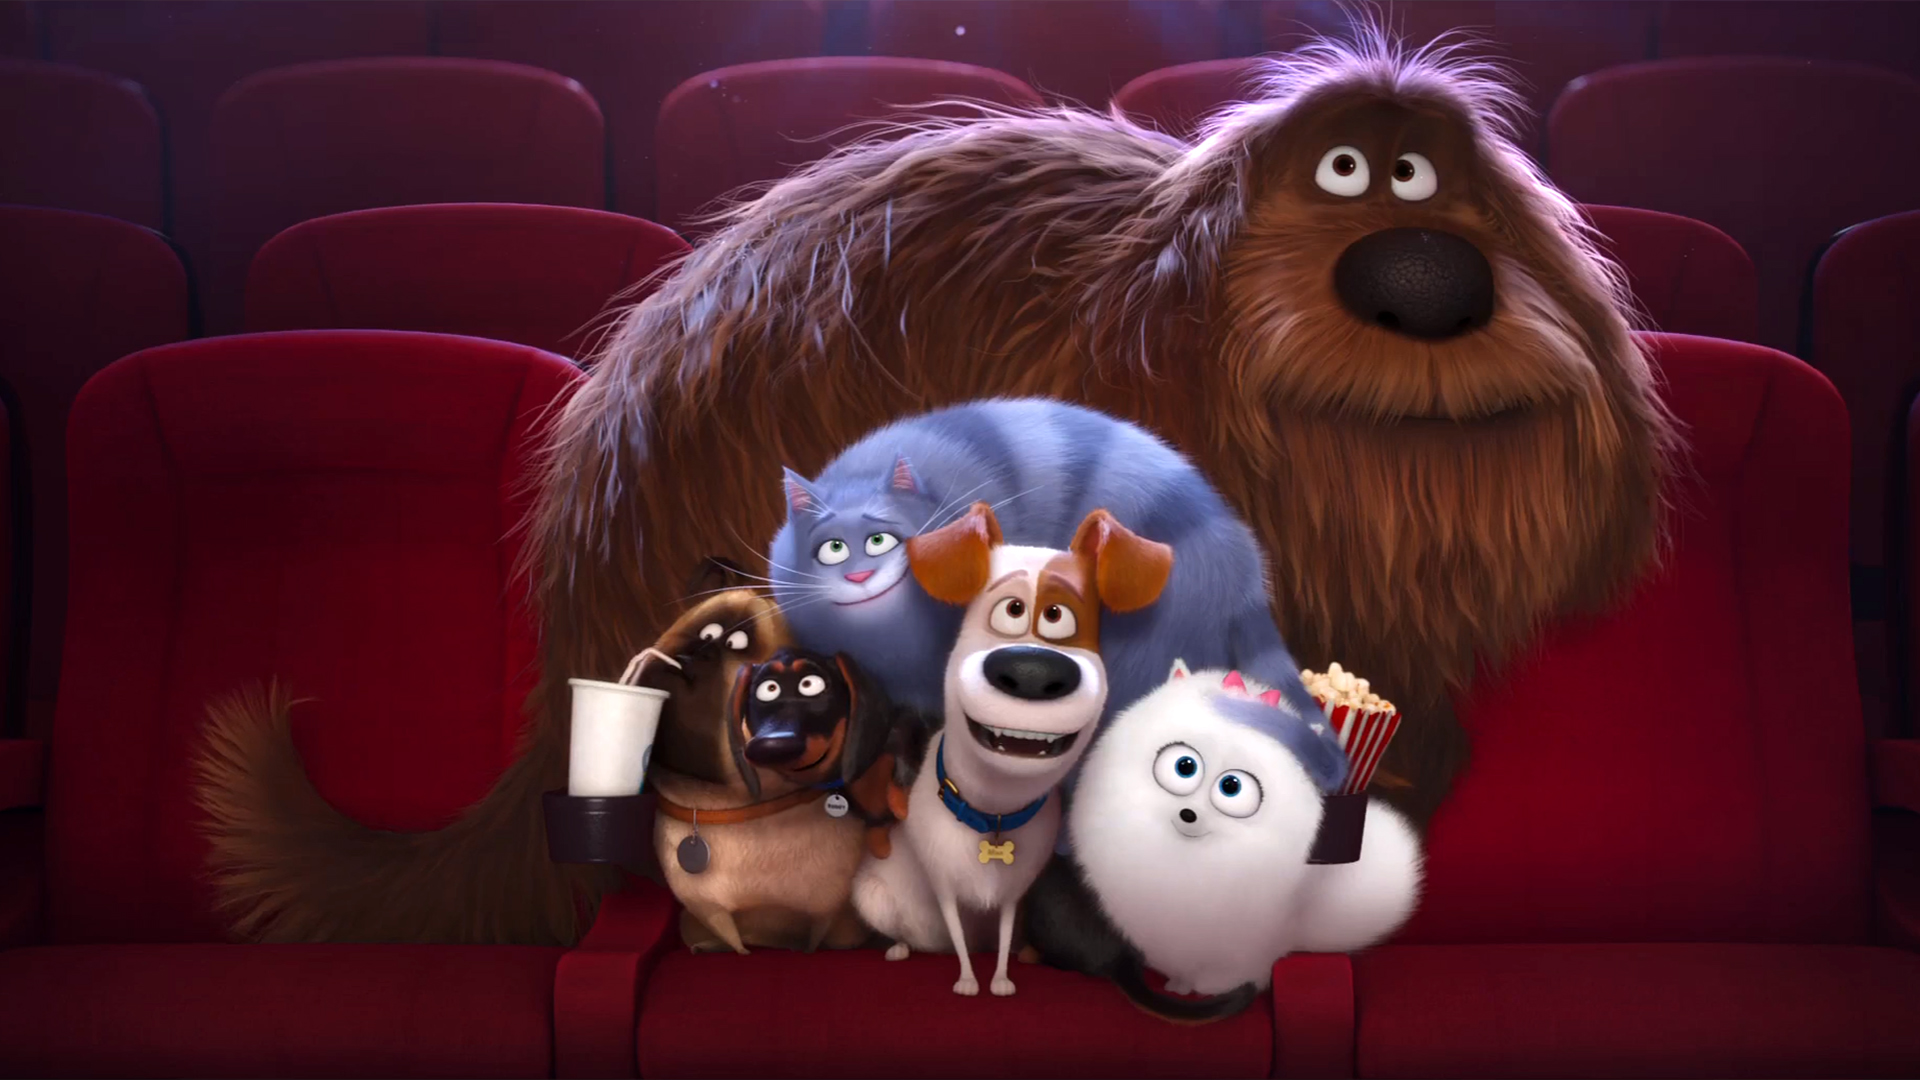 the secret life of pets movie free online